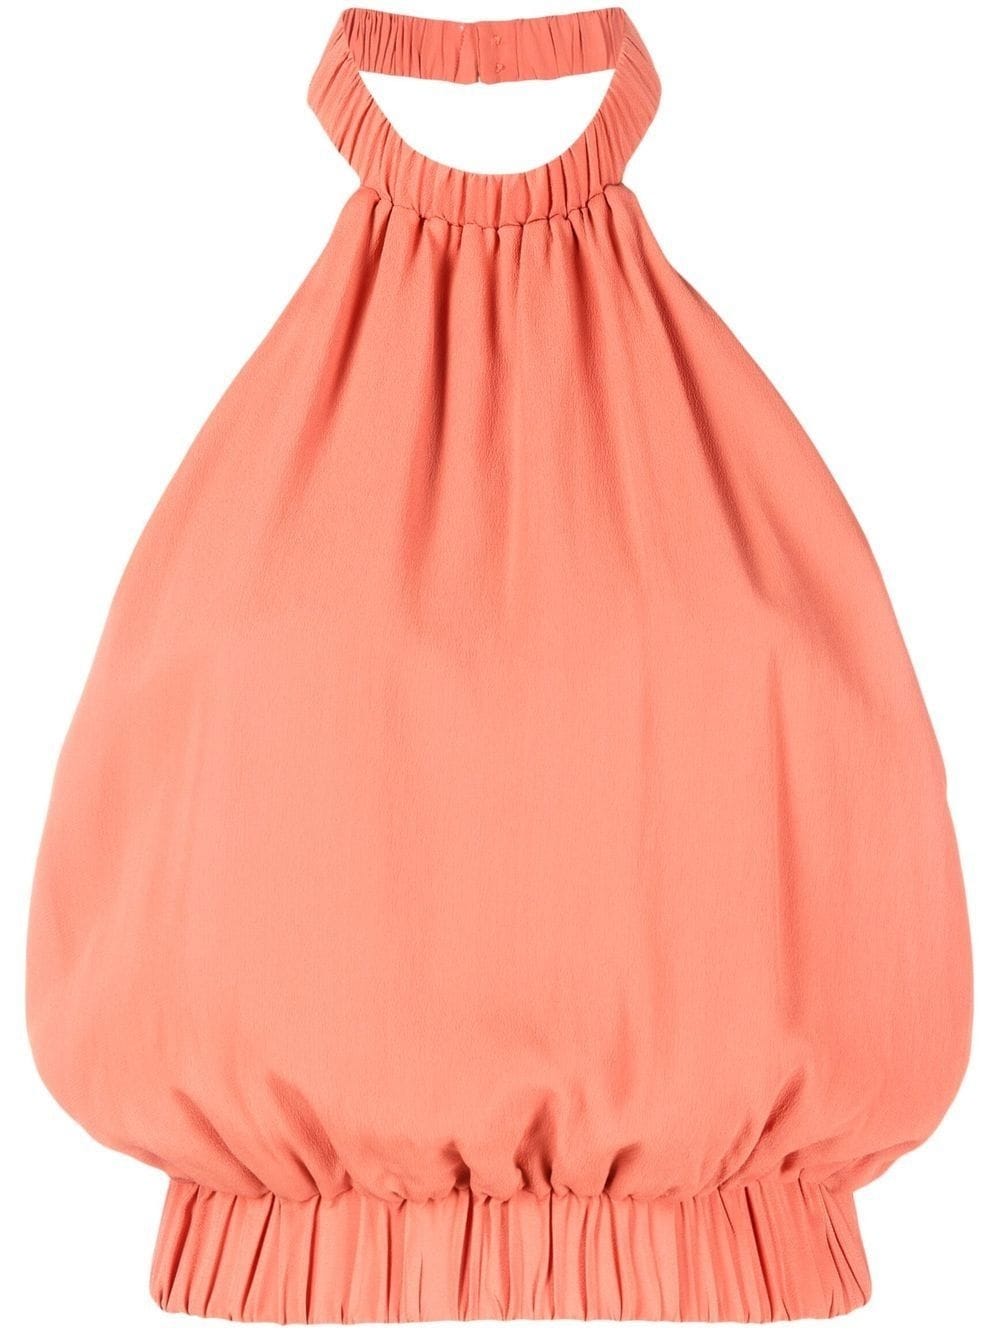 FEDERICA TOSI CORAL PINK HALTER NECK TOP